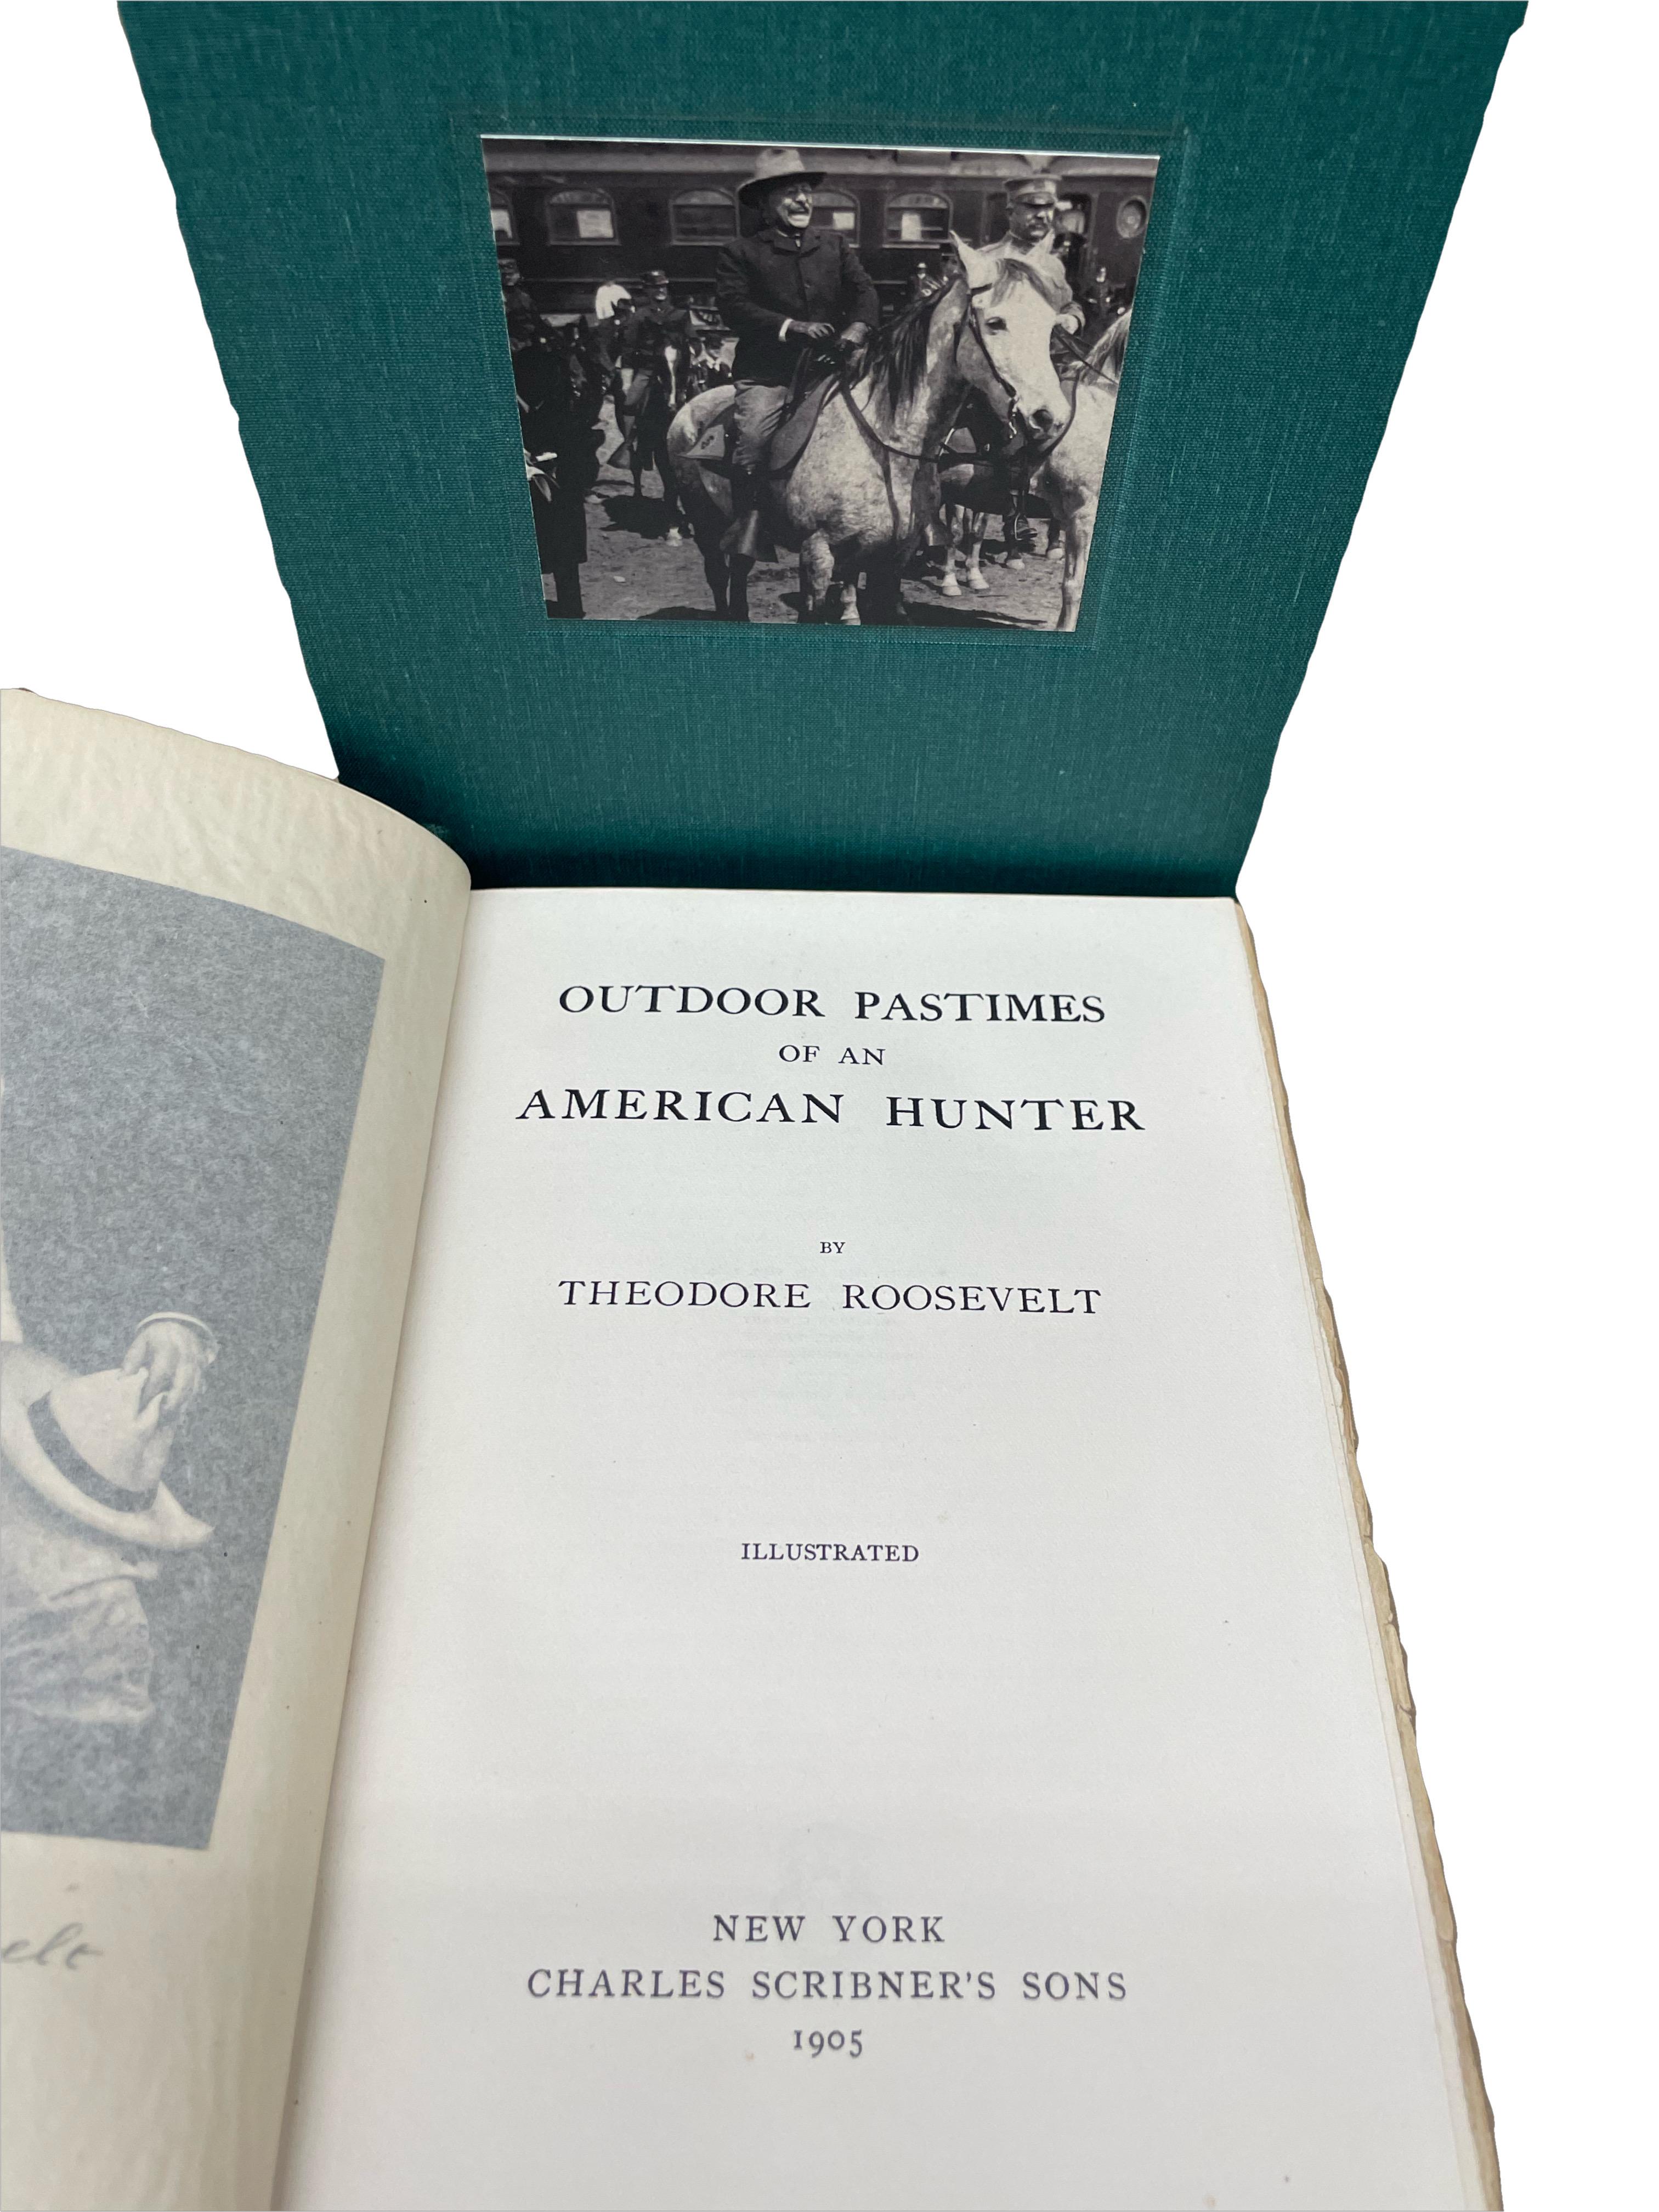 Roosevelt, Theodore. Outdoor Pastimes of an American Hunter. New York: Charles Scribner’s Sons, 1905. First Edition. Quarto. Newly bound in quarter leather and cloth boards, with gold tooling, titles, and raised bands to the spine. Illustrated with